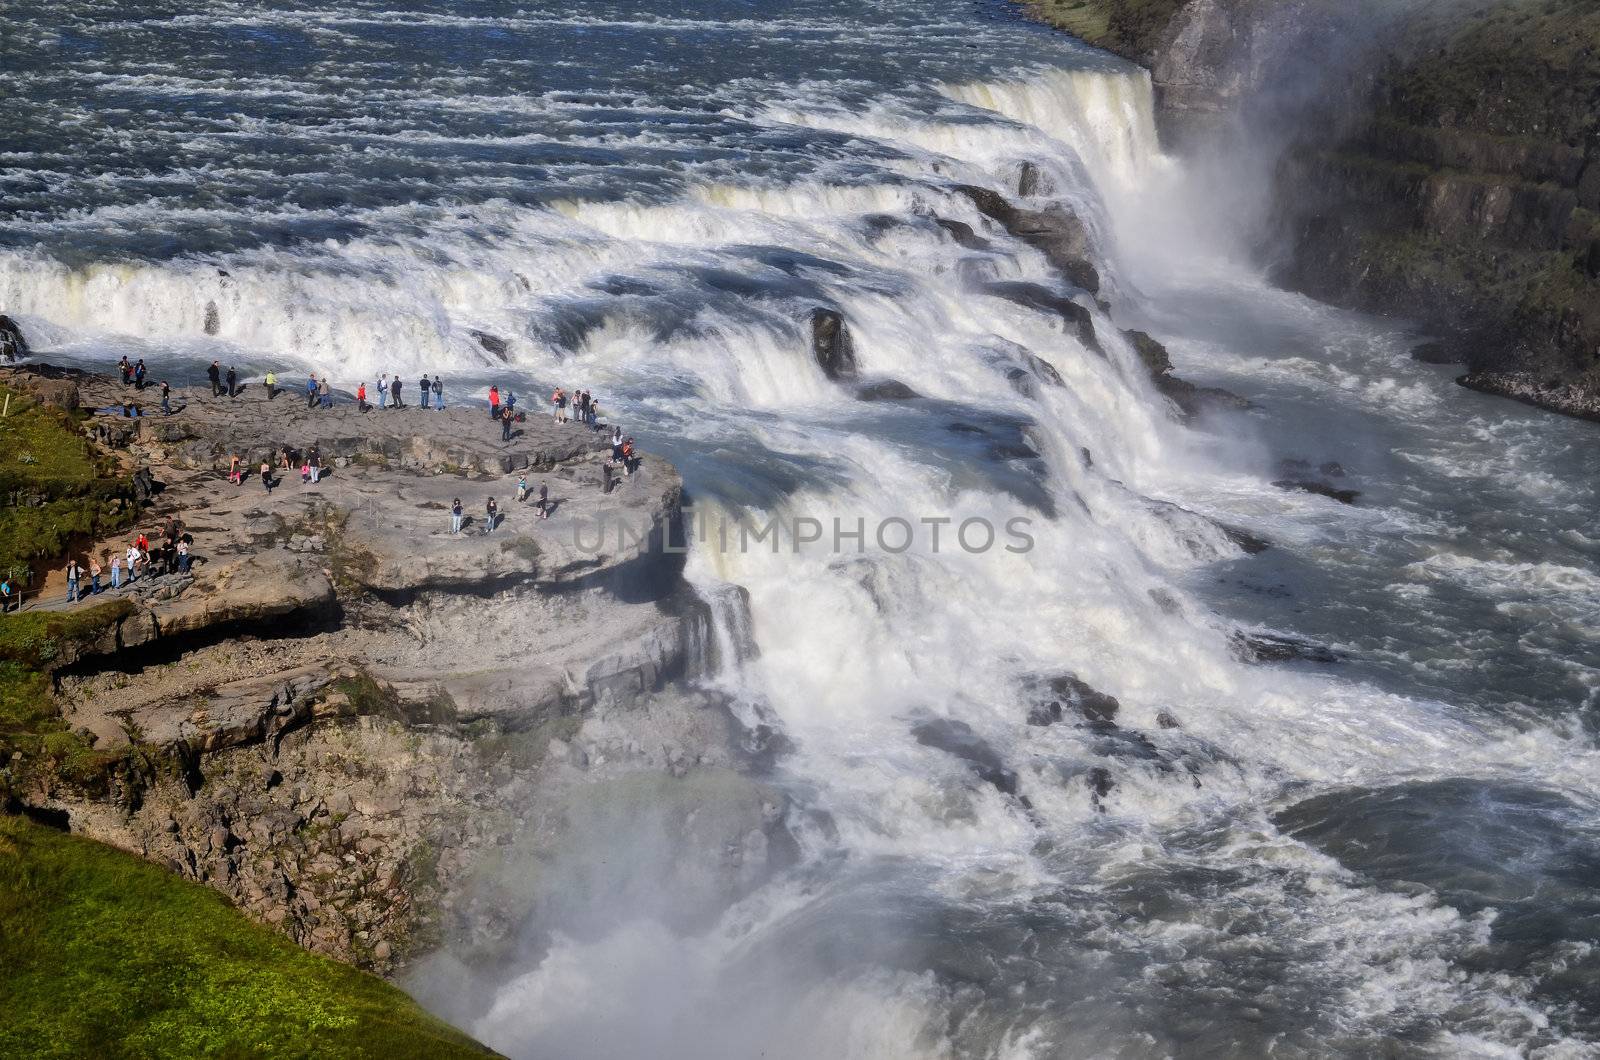 Gullfoss wild waterfall, strong running water and people, Iceland by martinm303